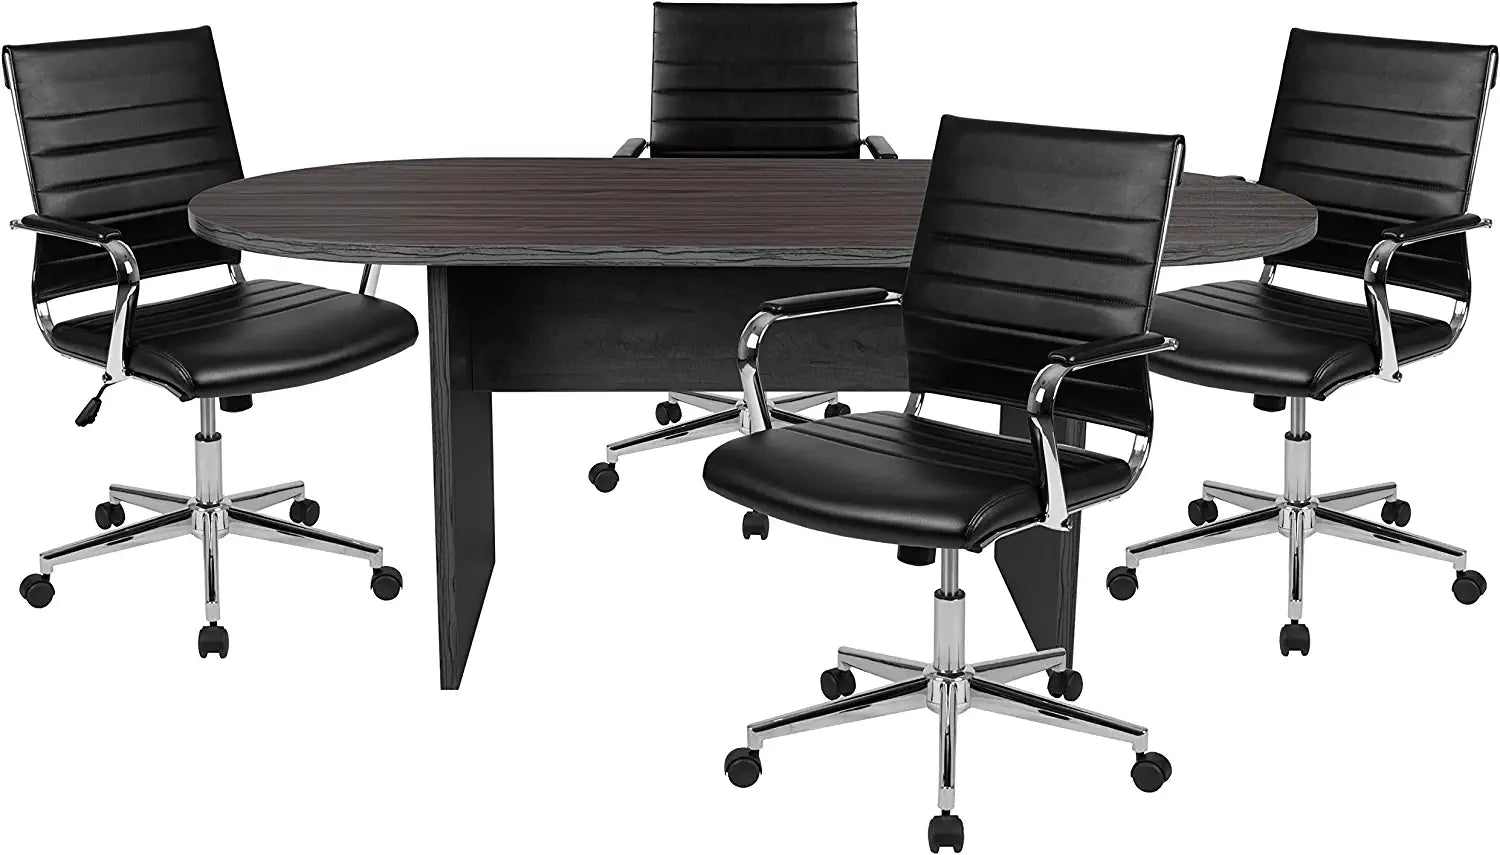 Flash Furniture 5 Piece Rustic Gray Oval Conference Table Set with 4 Black LeatherSoft Ribbed Executive Chairs